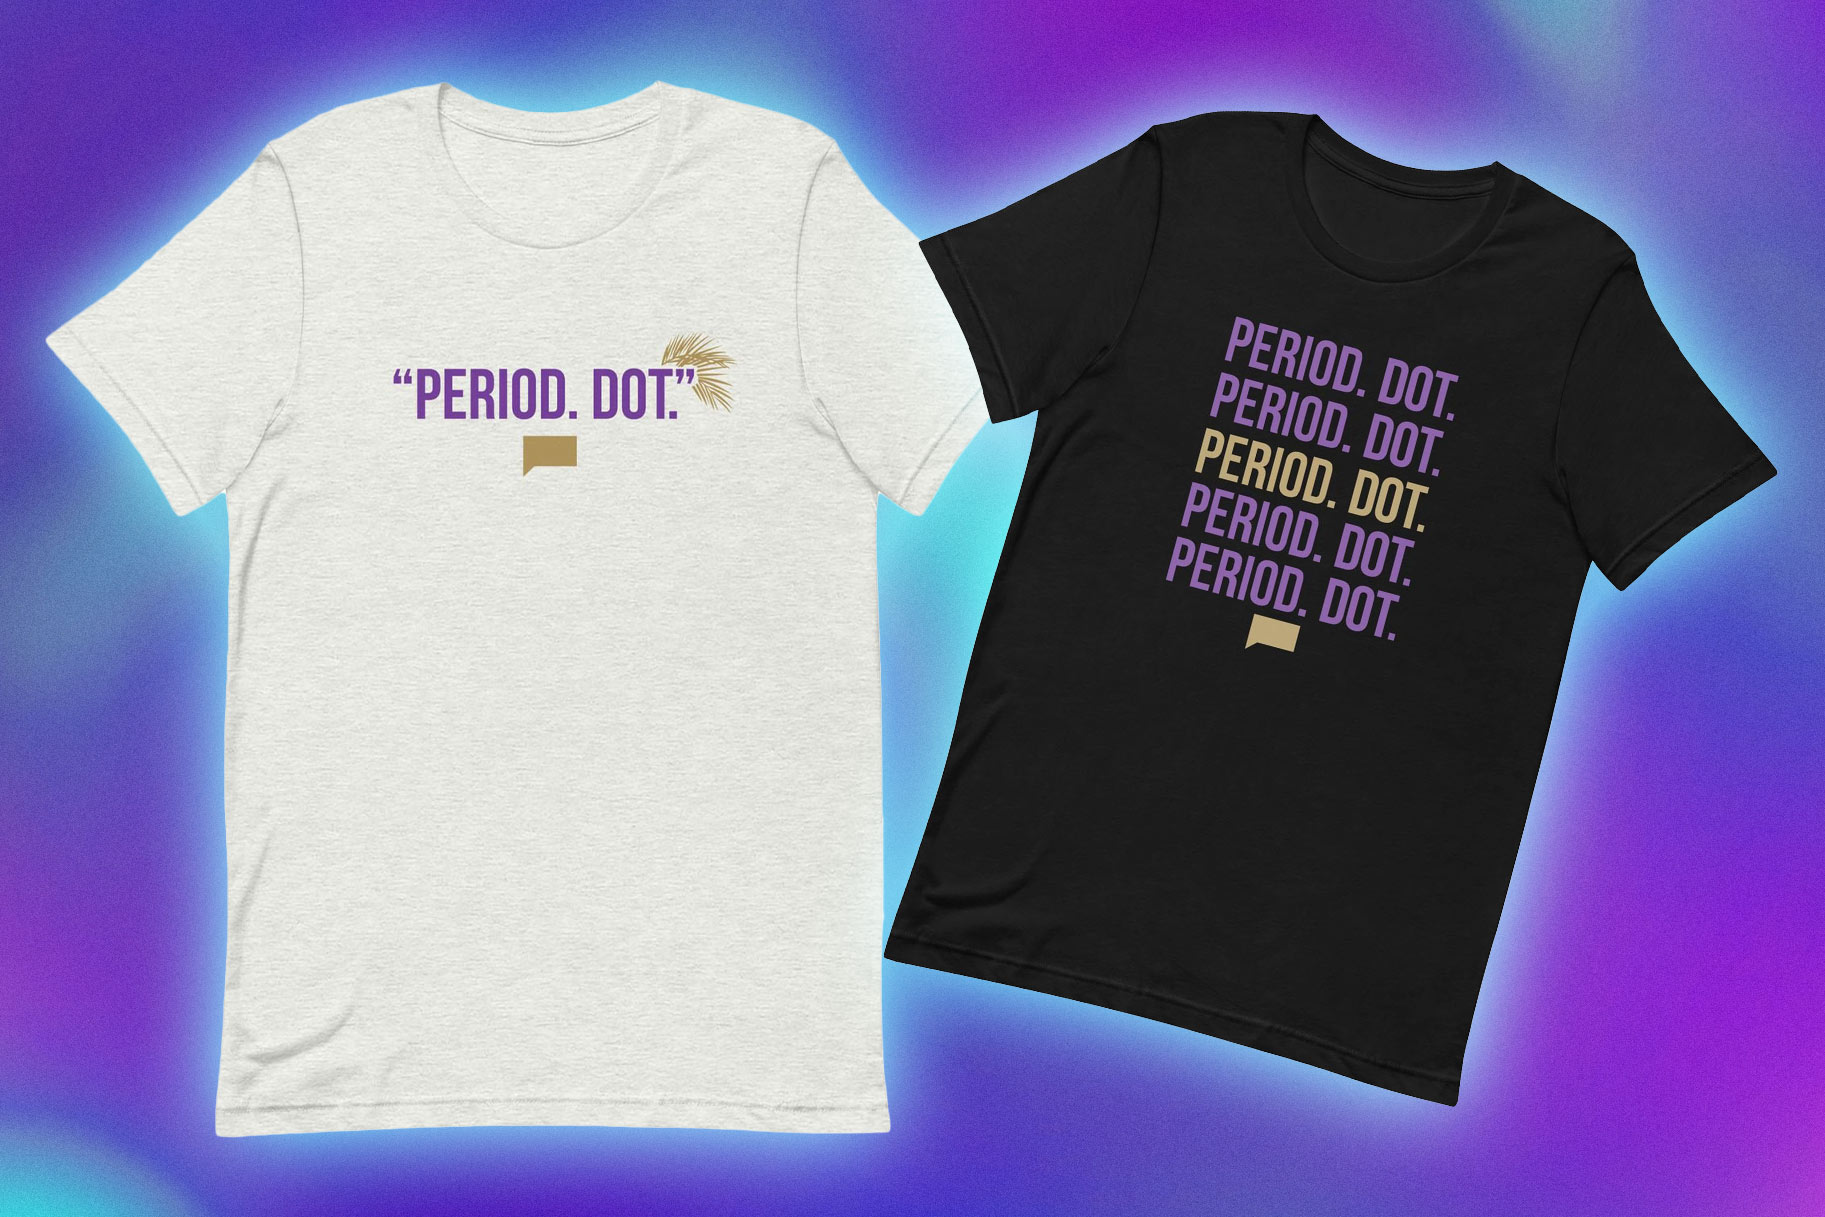 T-shirts with quotes on them overlaid onto a colorful background.